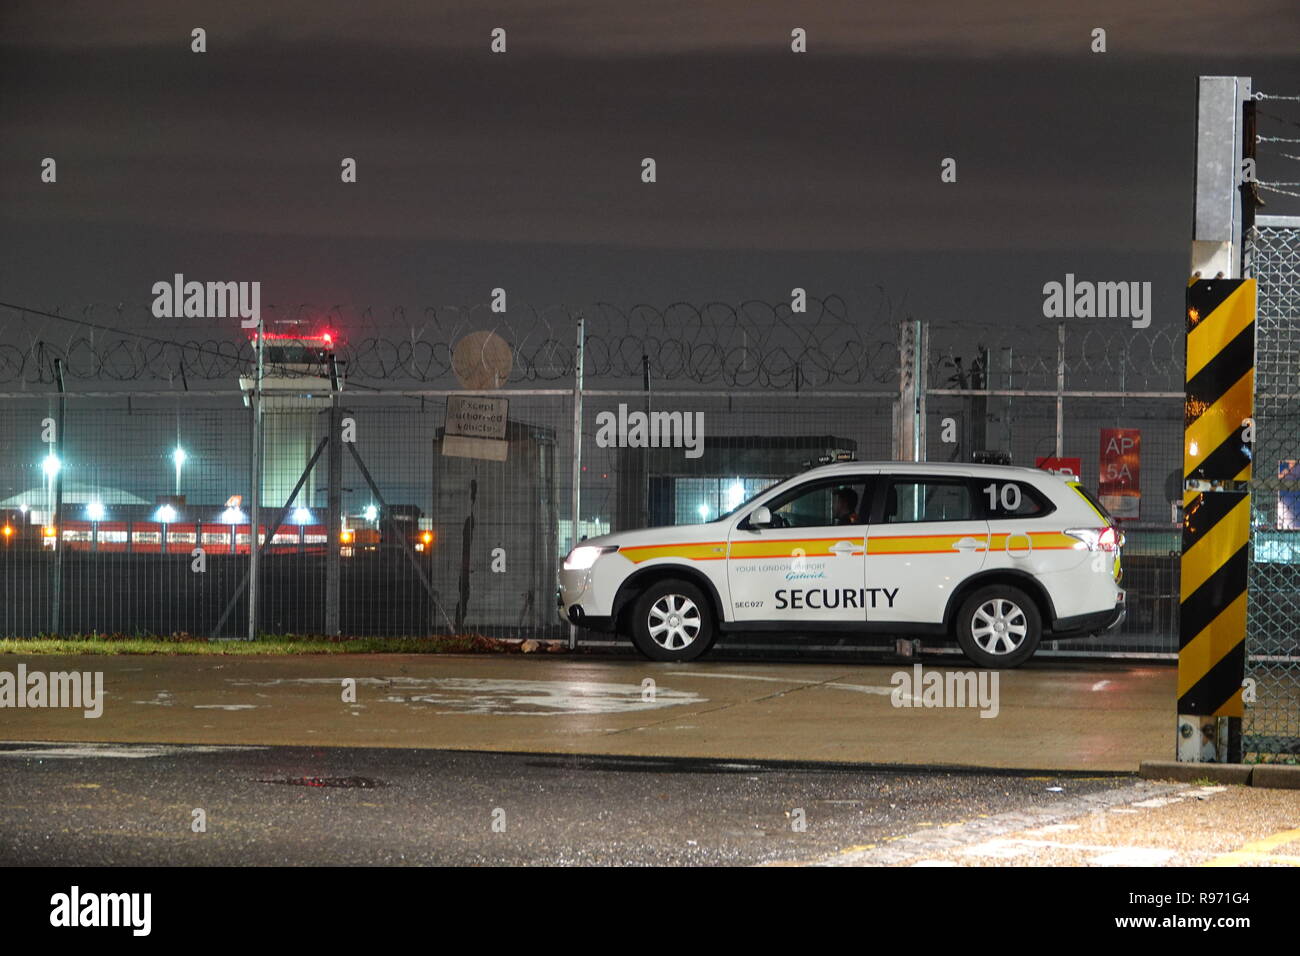 London Gatwick, UK. 20th December, 2018. Gatwick Airport Security vehicle guards runway with control tower behind on Thursday night, as drone activity causes the airport to close for over 24 hours. Credit: Andy Stehrenberger/Alamy Live News Stock Photo